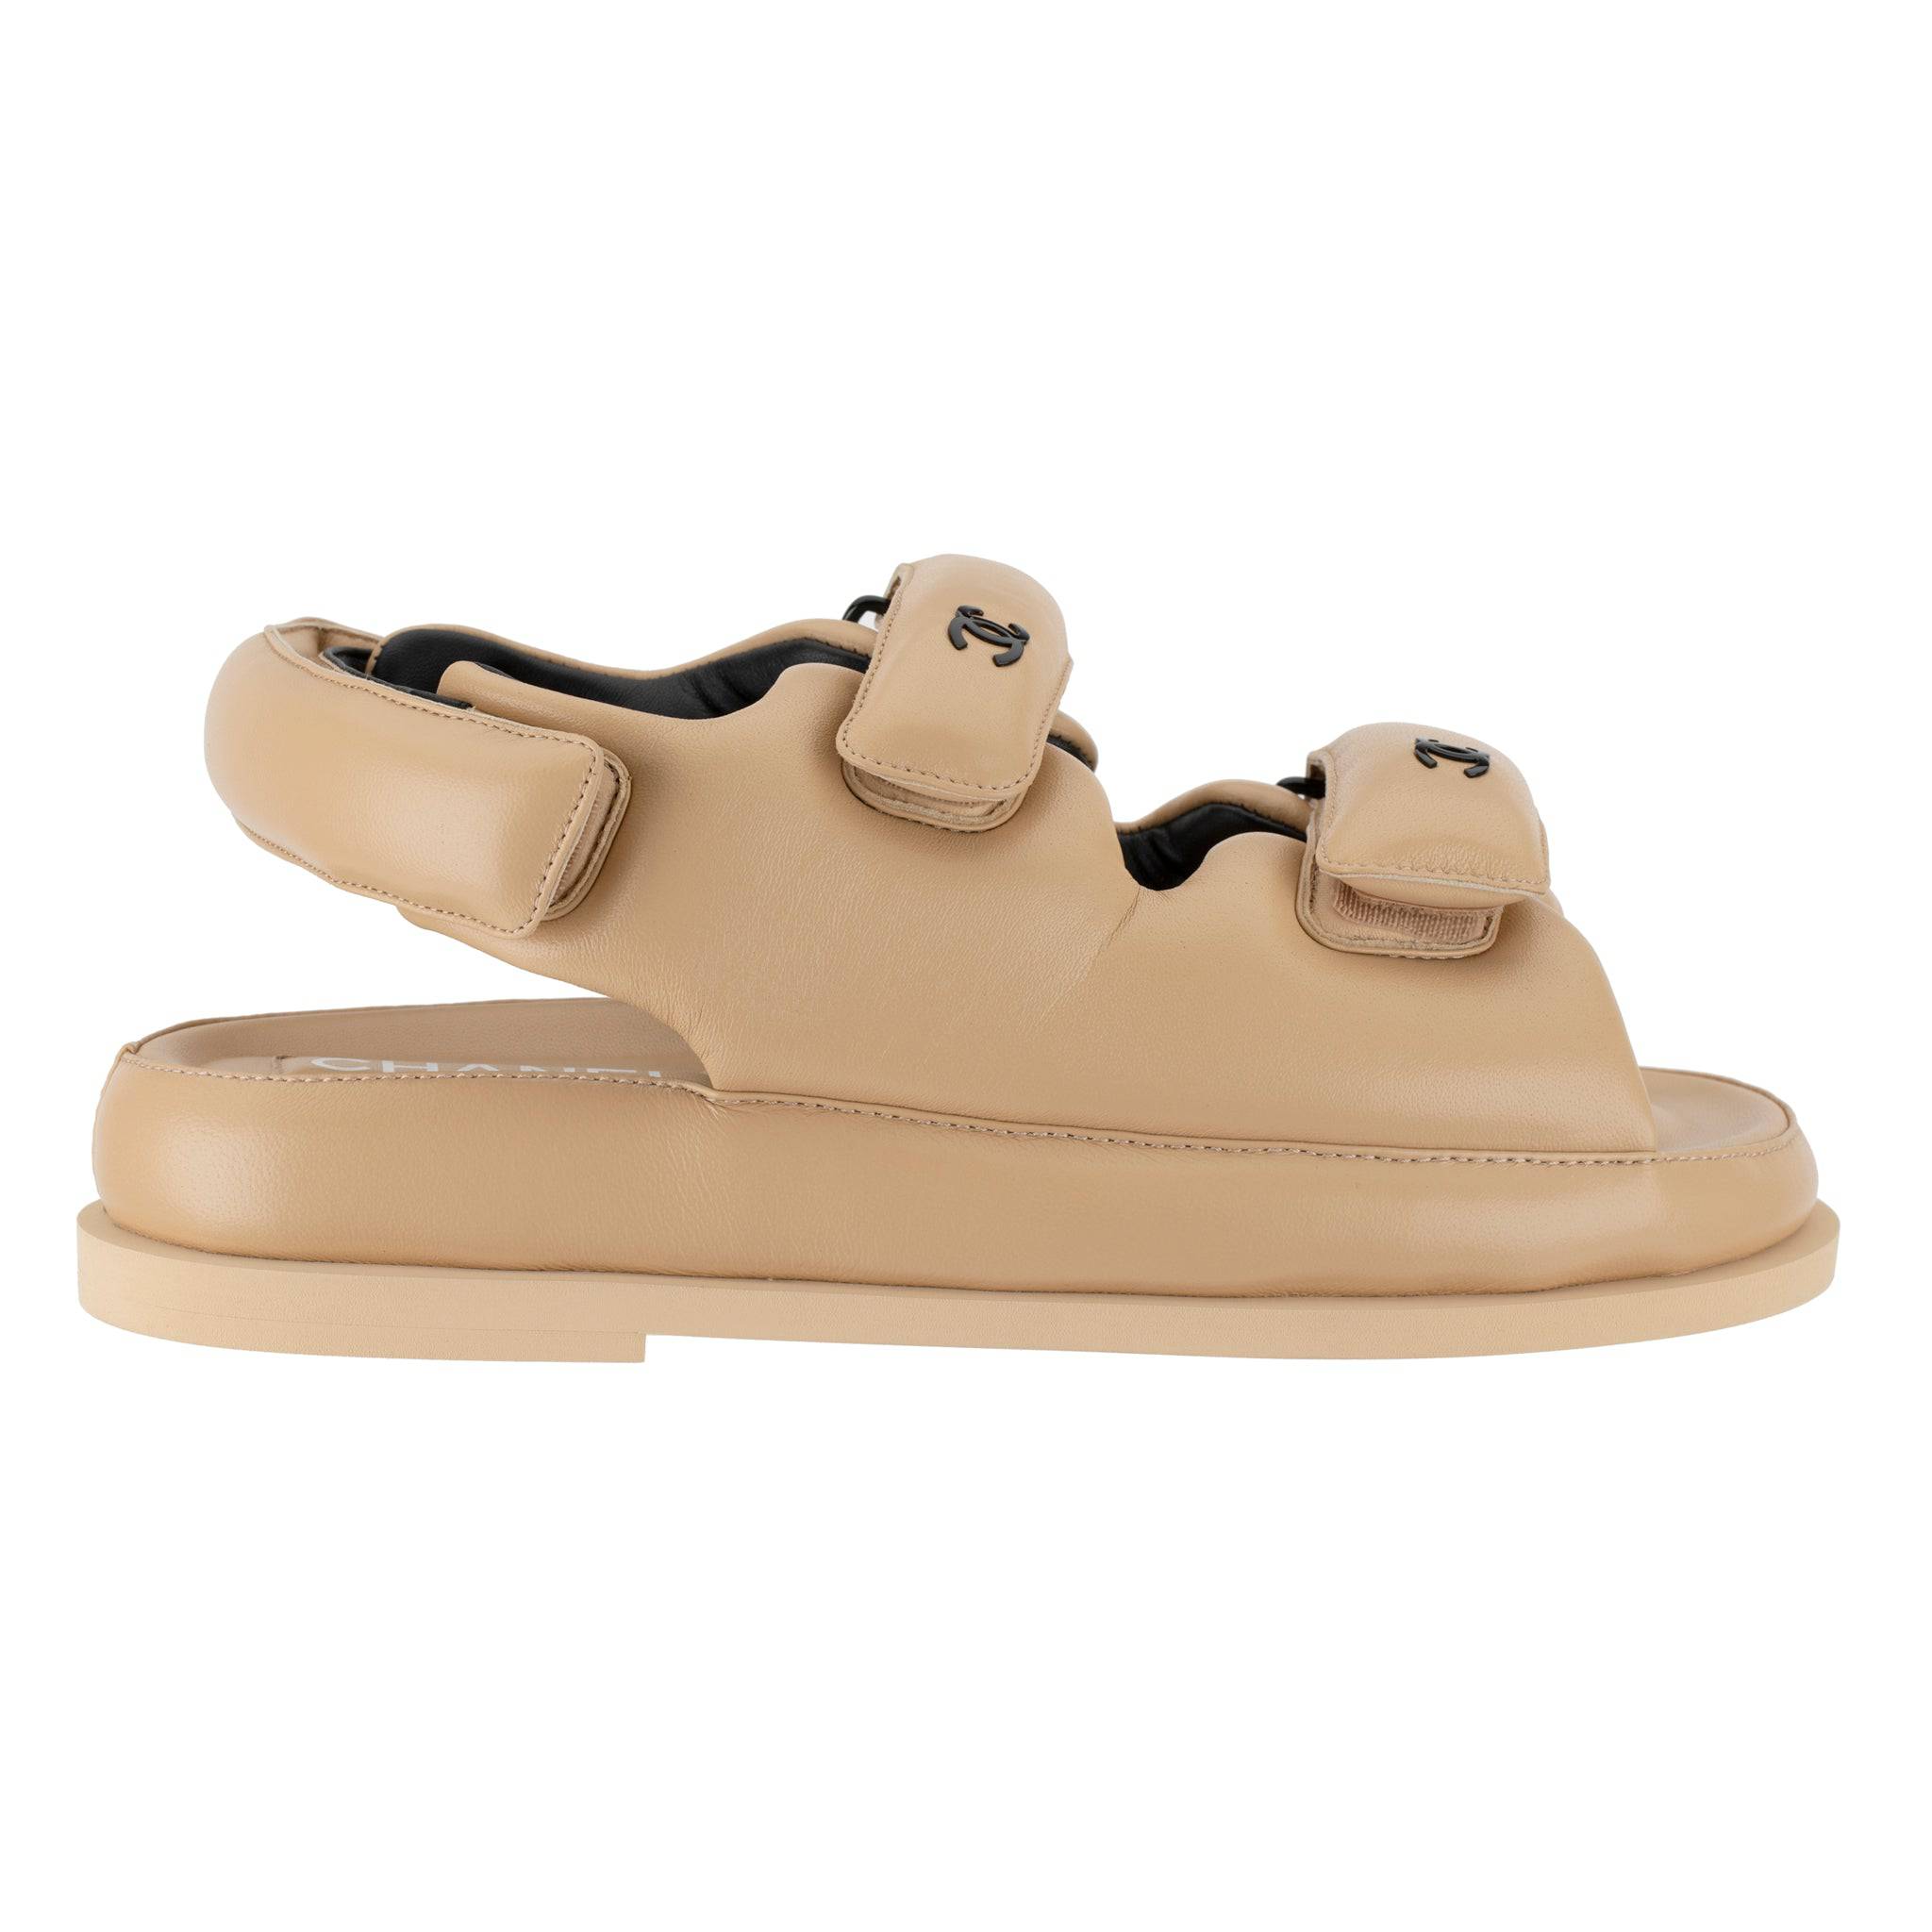 CHANEL DAD SANDALS PADDED LAMBSKIN BEIGE 39 FR - On Repeat